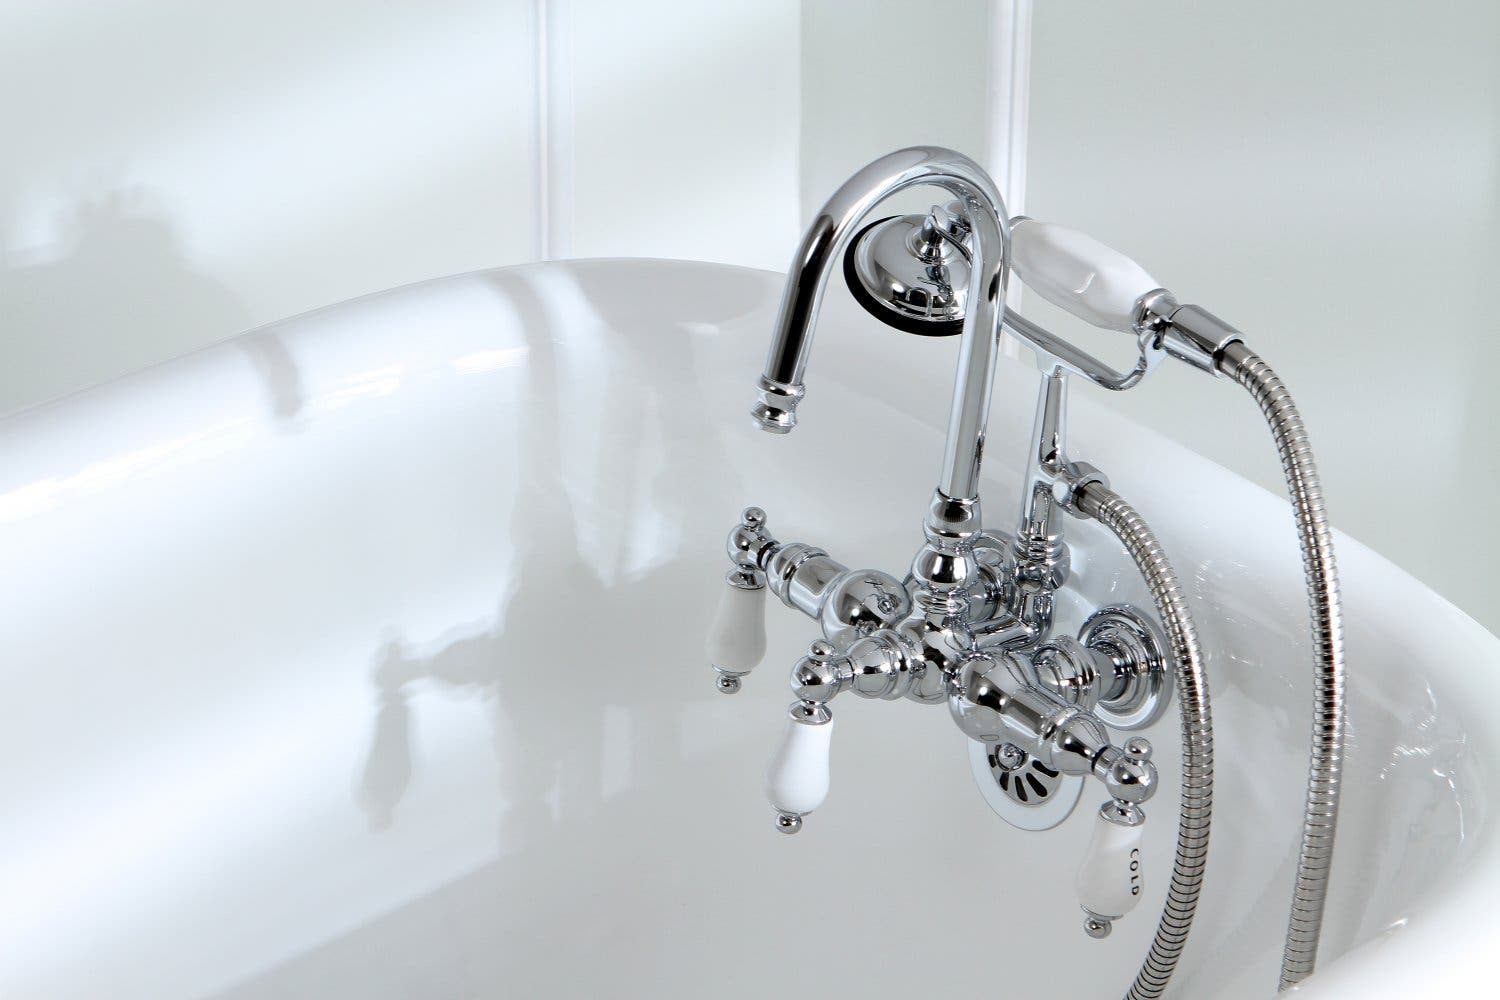 Tub Faucet Feature 1: CC10T1 - An Ideal Pairing of Traditional Opulence to your Bathtub